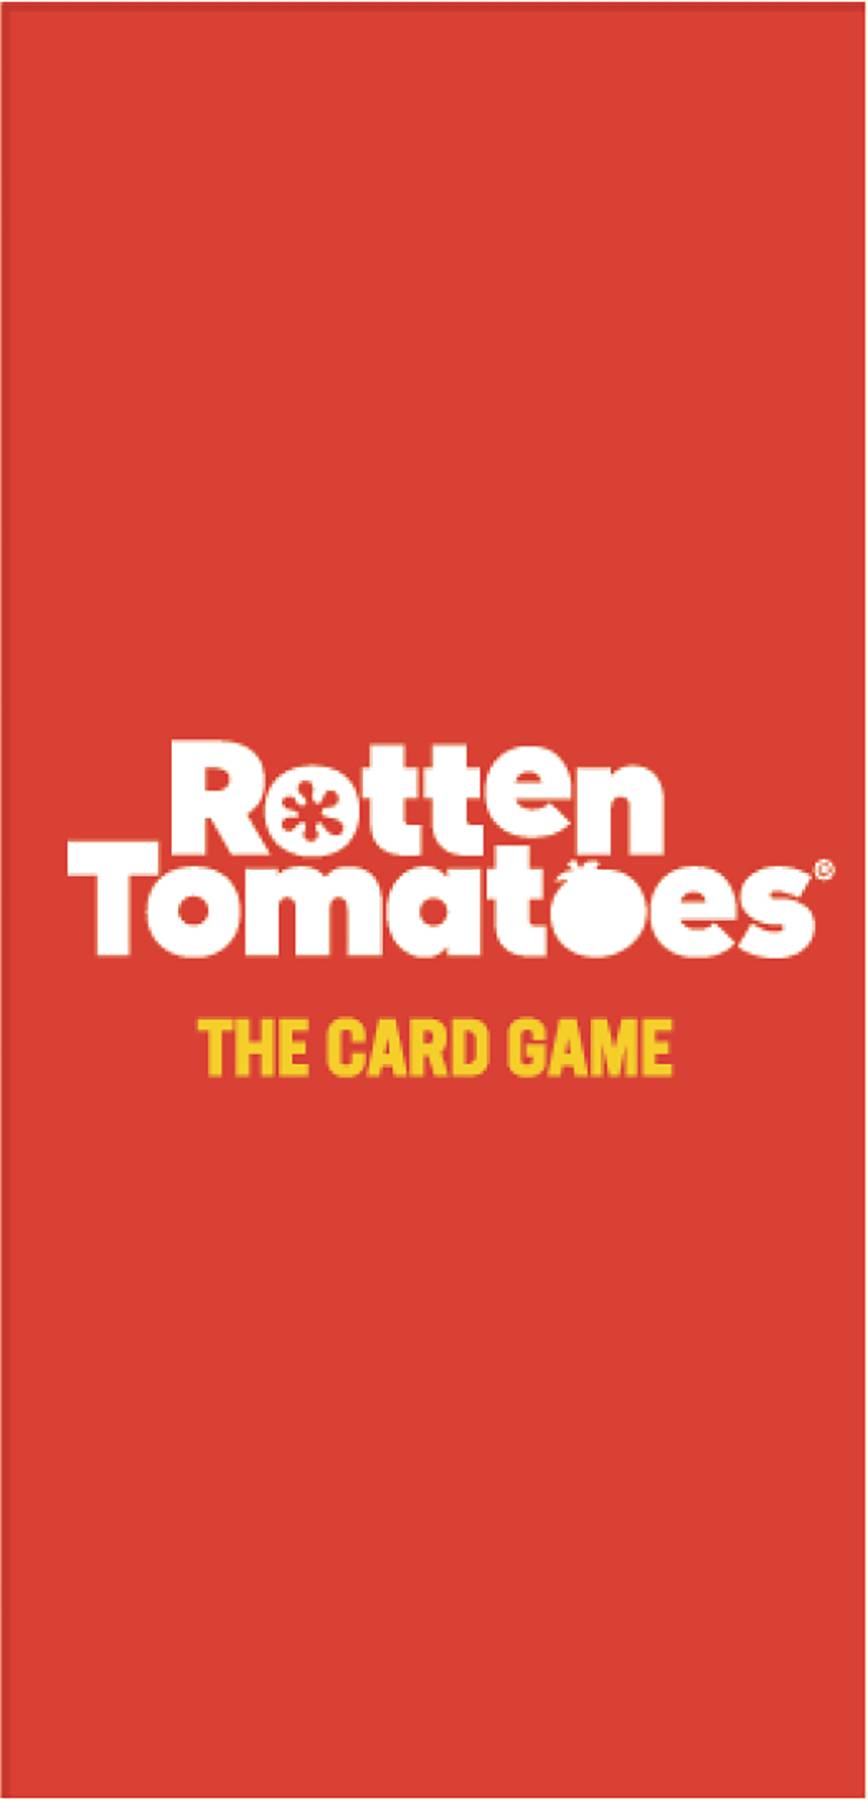 ROTTEN TOMATOES CARD GAME